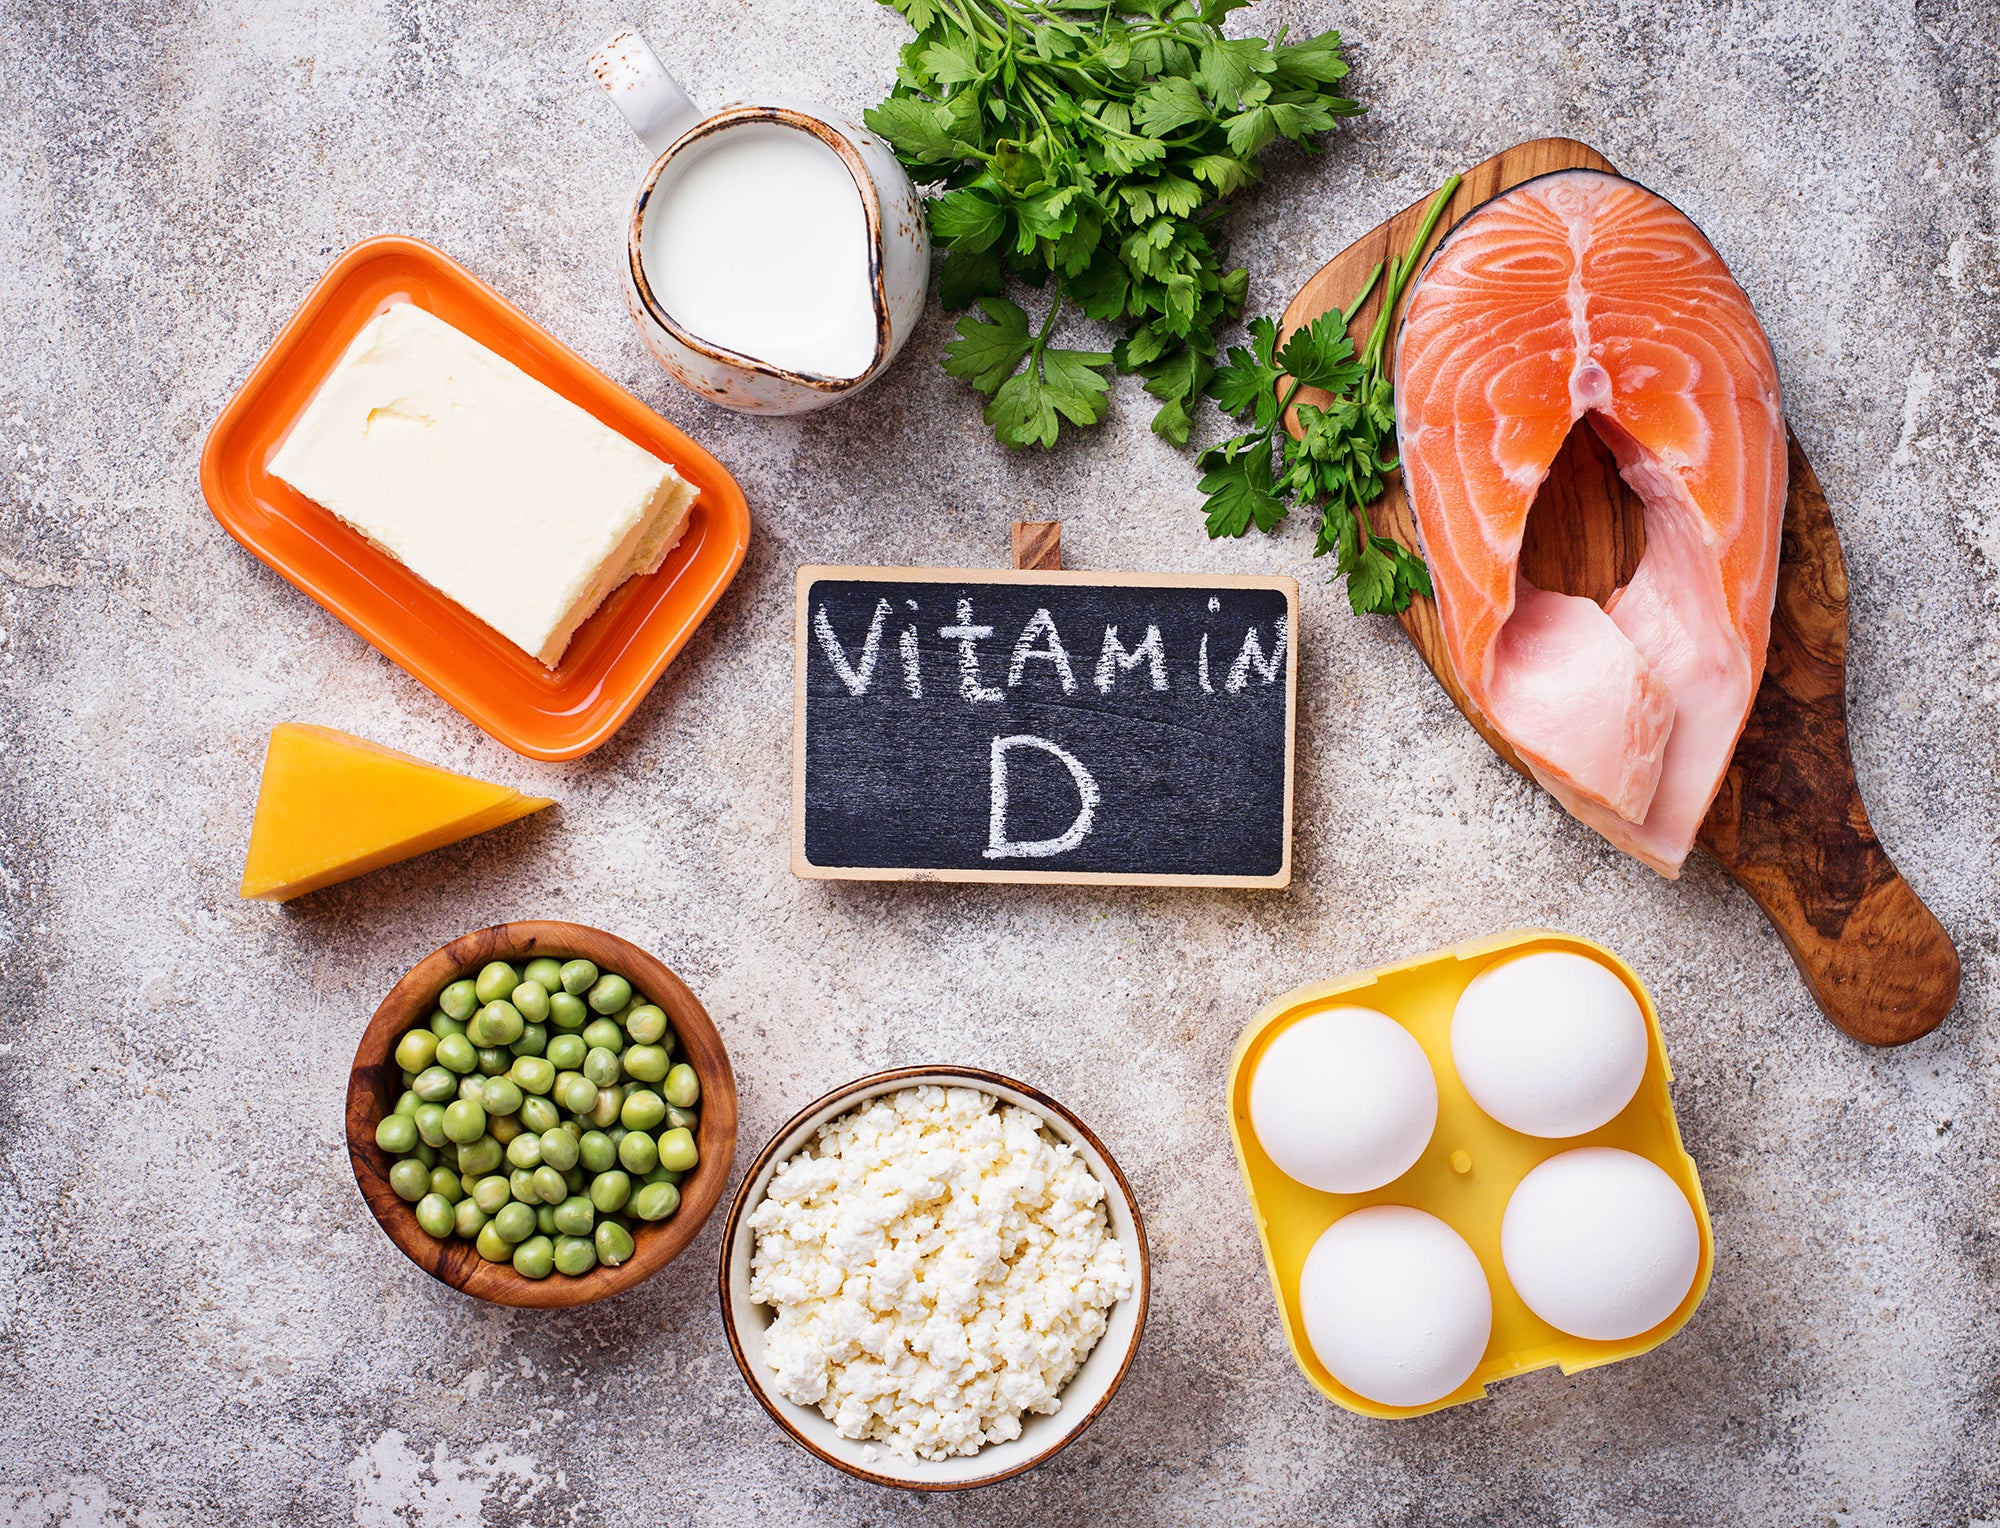 healthy-foods-containing-vitamin-d-2FFKECB